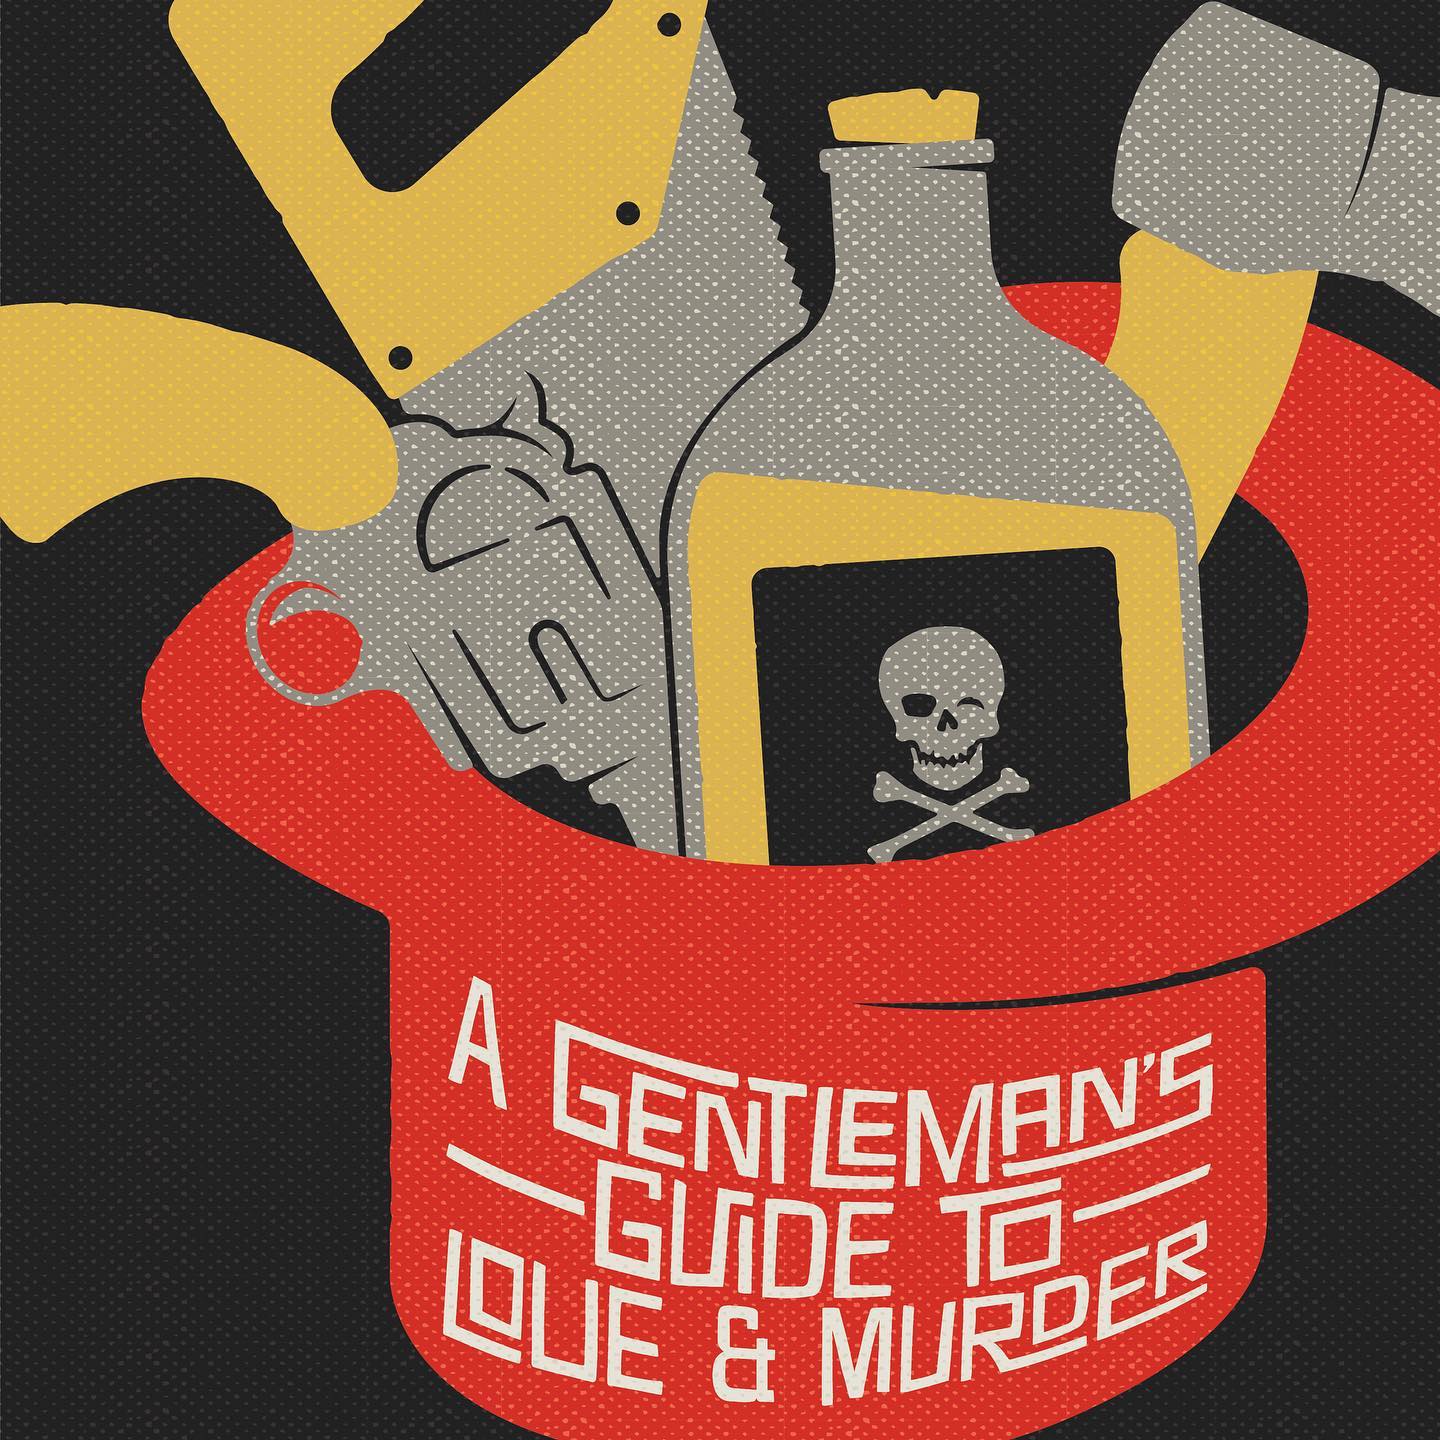 Theater Review: A Gentleman’s Guide To Love & Murder